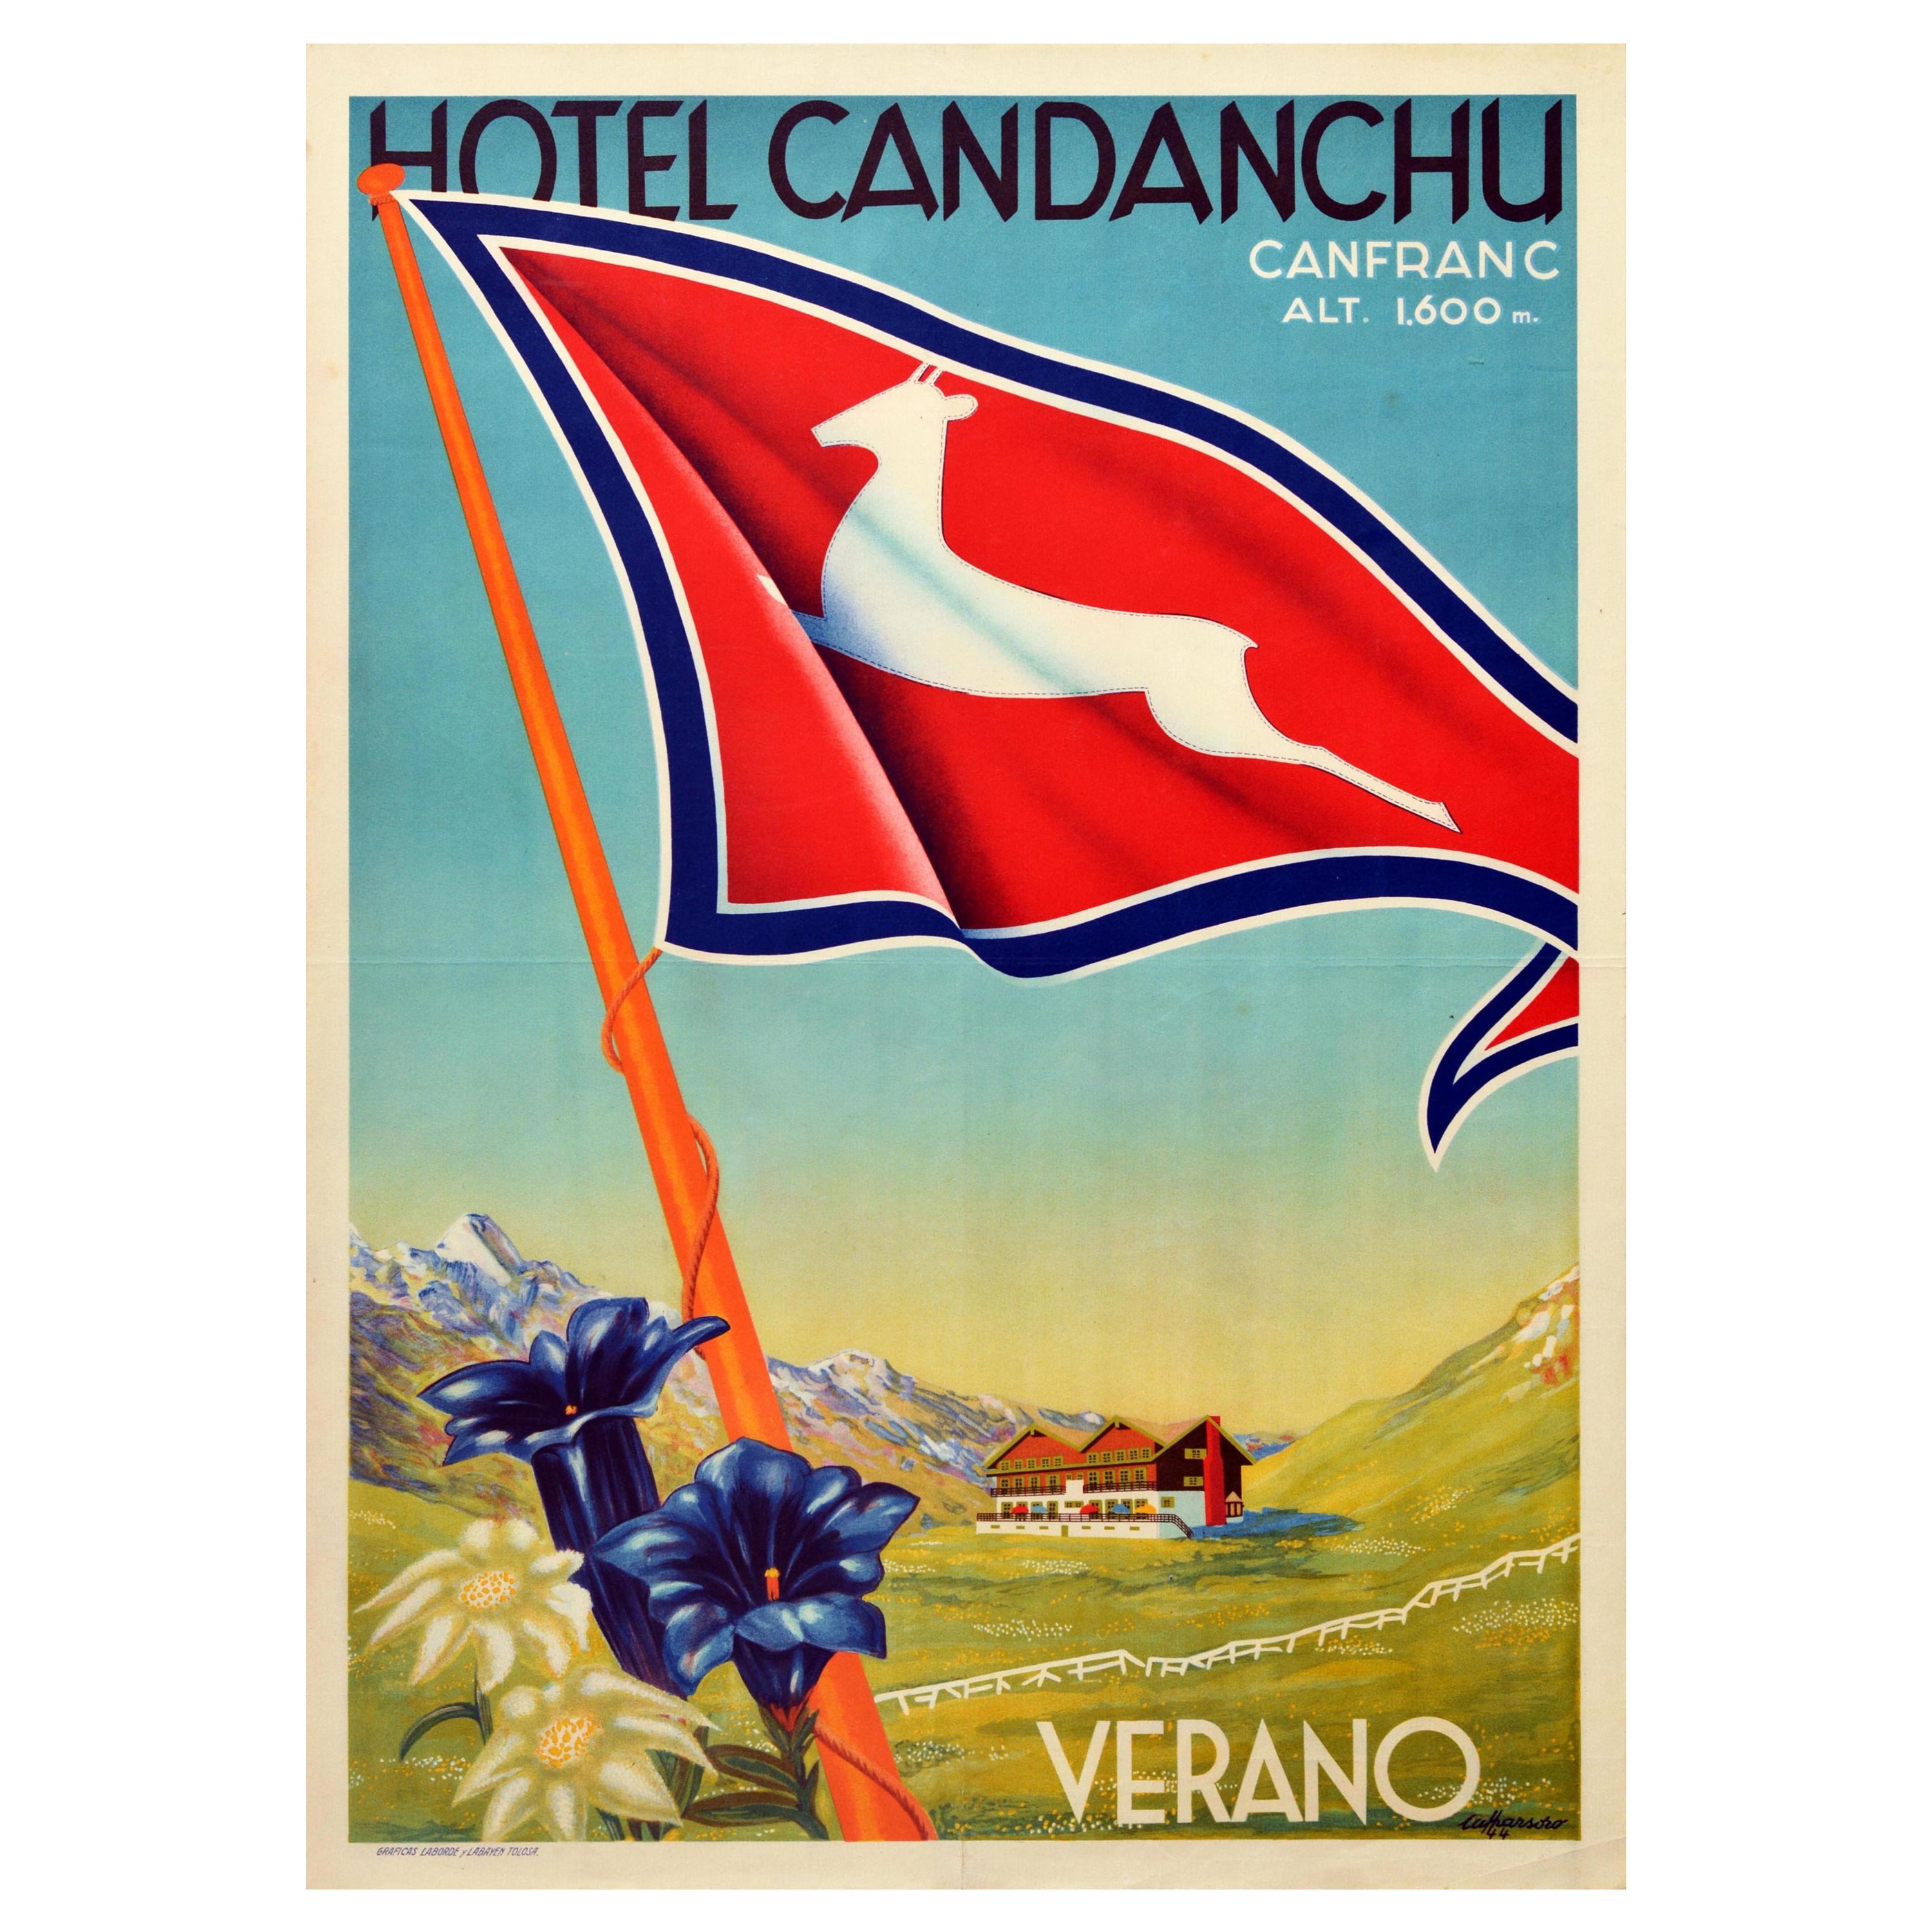 Original Vintage Travel Poster Hotel Candanchu Canfranc Verano Summer Mountains For Sale